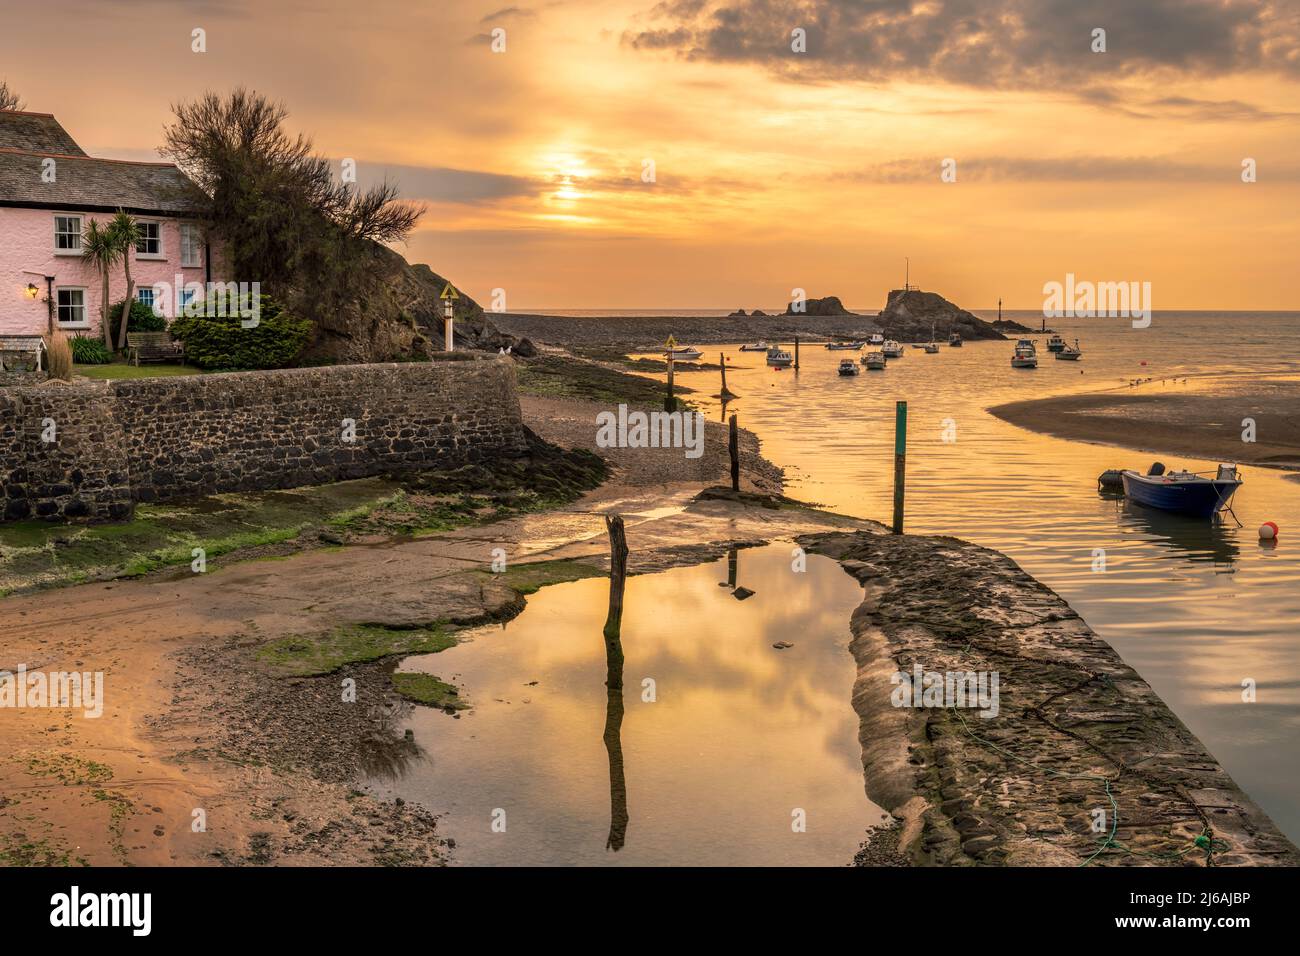 Bude, Cornwall, UK. Friday 29th April 2022. After a warm spring day in the South West of England, layers of cloud build on the horizon as the sun sets over the breakwater at Bude in North East Cornwall. Terry Mathews. Alamy Live News. Stock Photo